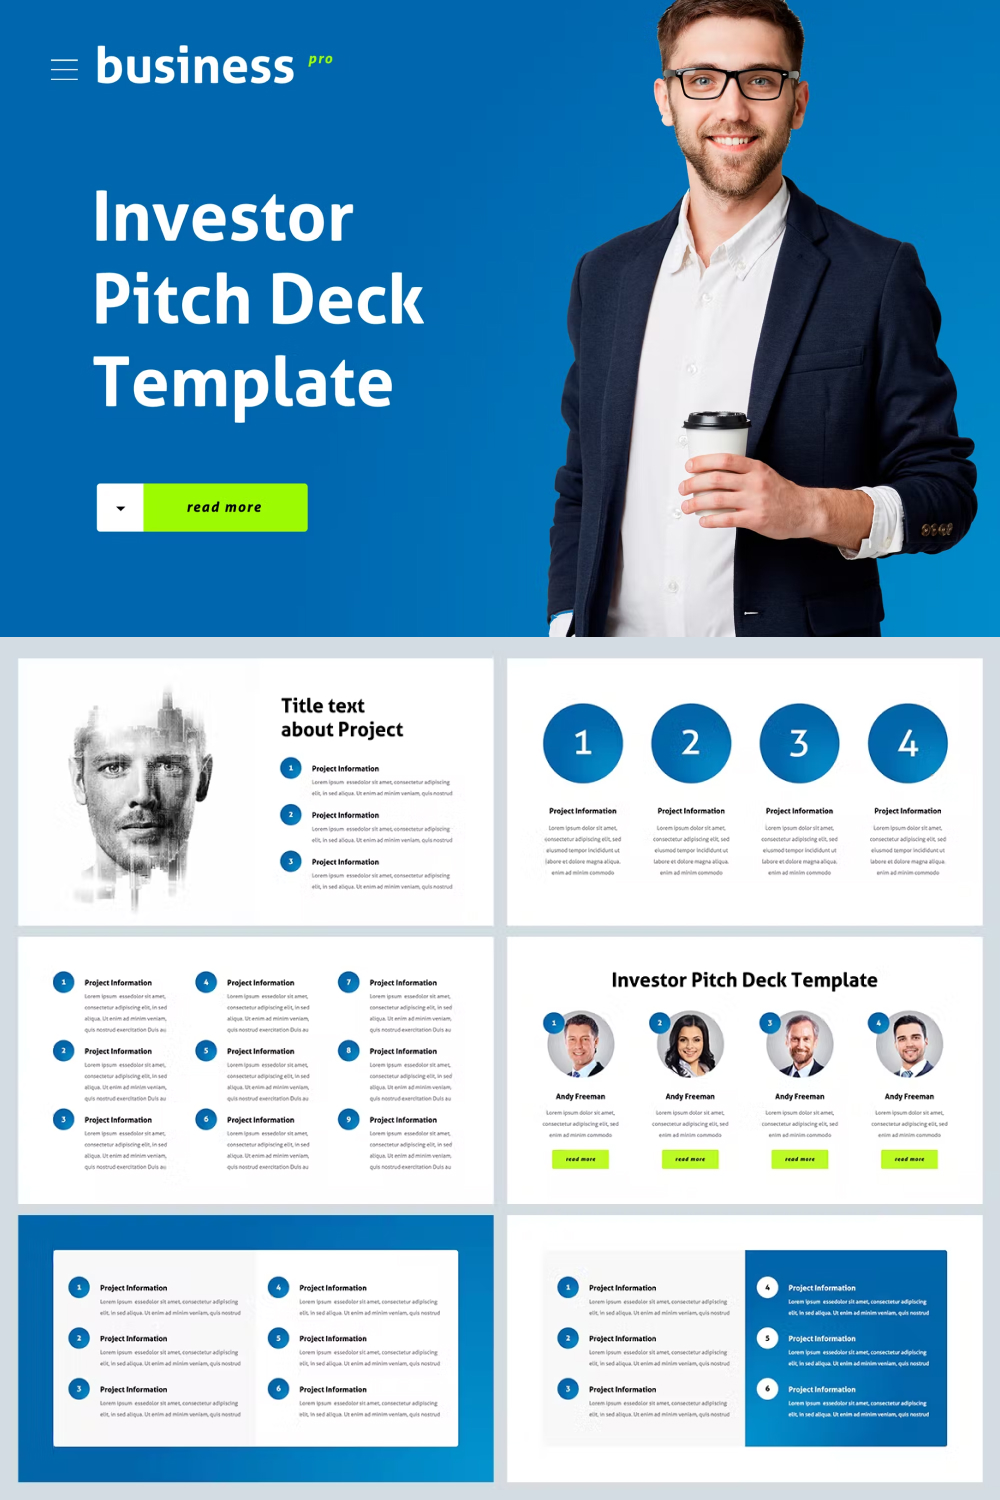 Investor pitch deck template powerpoint of pinterest.